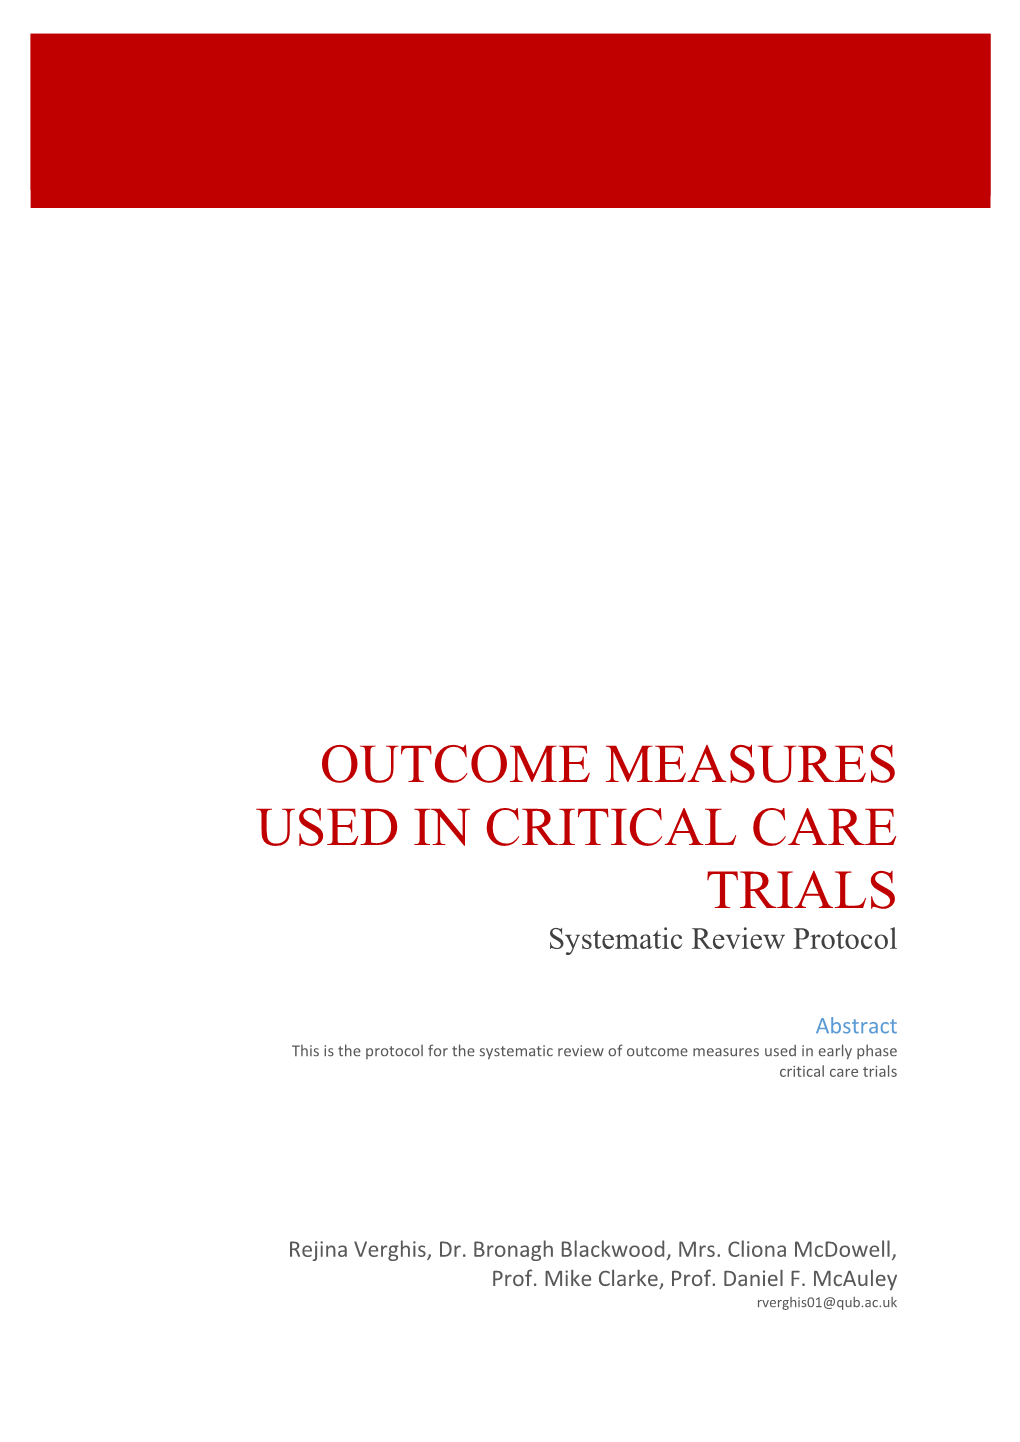 OUTCOME MEASURES USED in CRITICAL CARE TRIALS Systematic Review Protocol